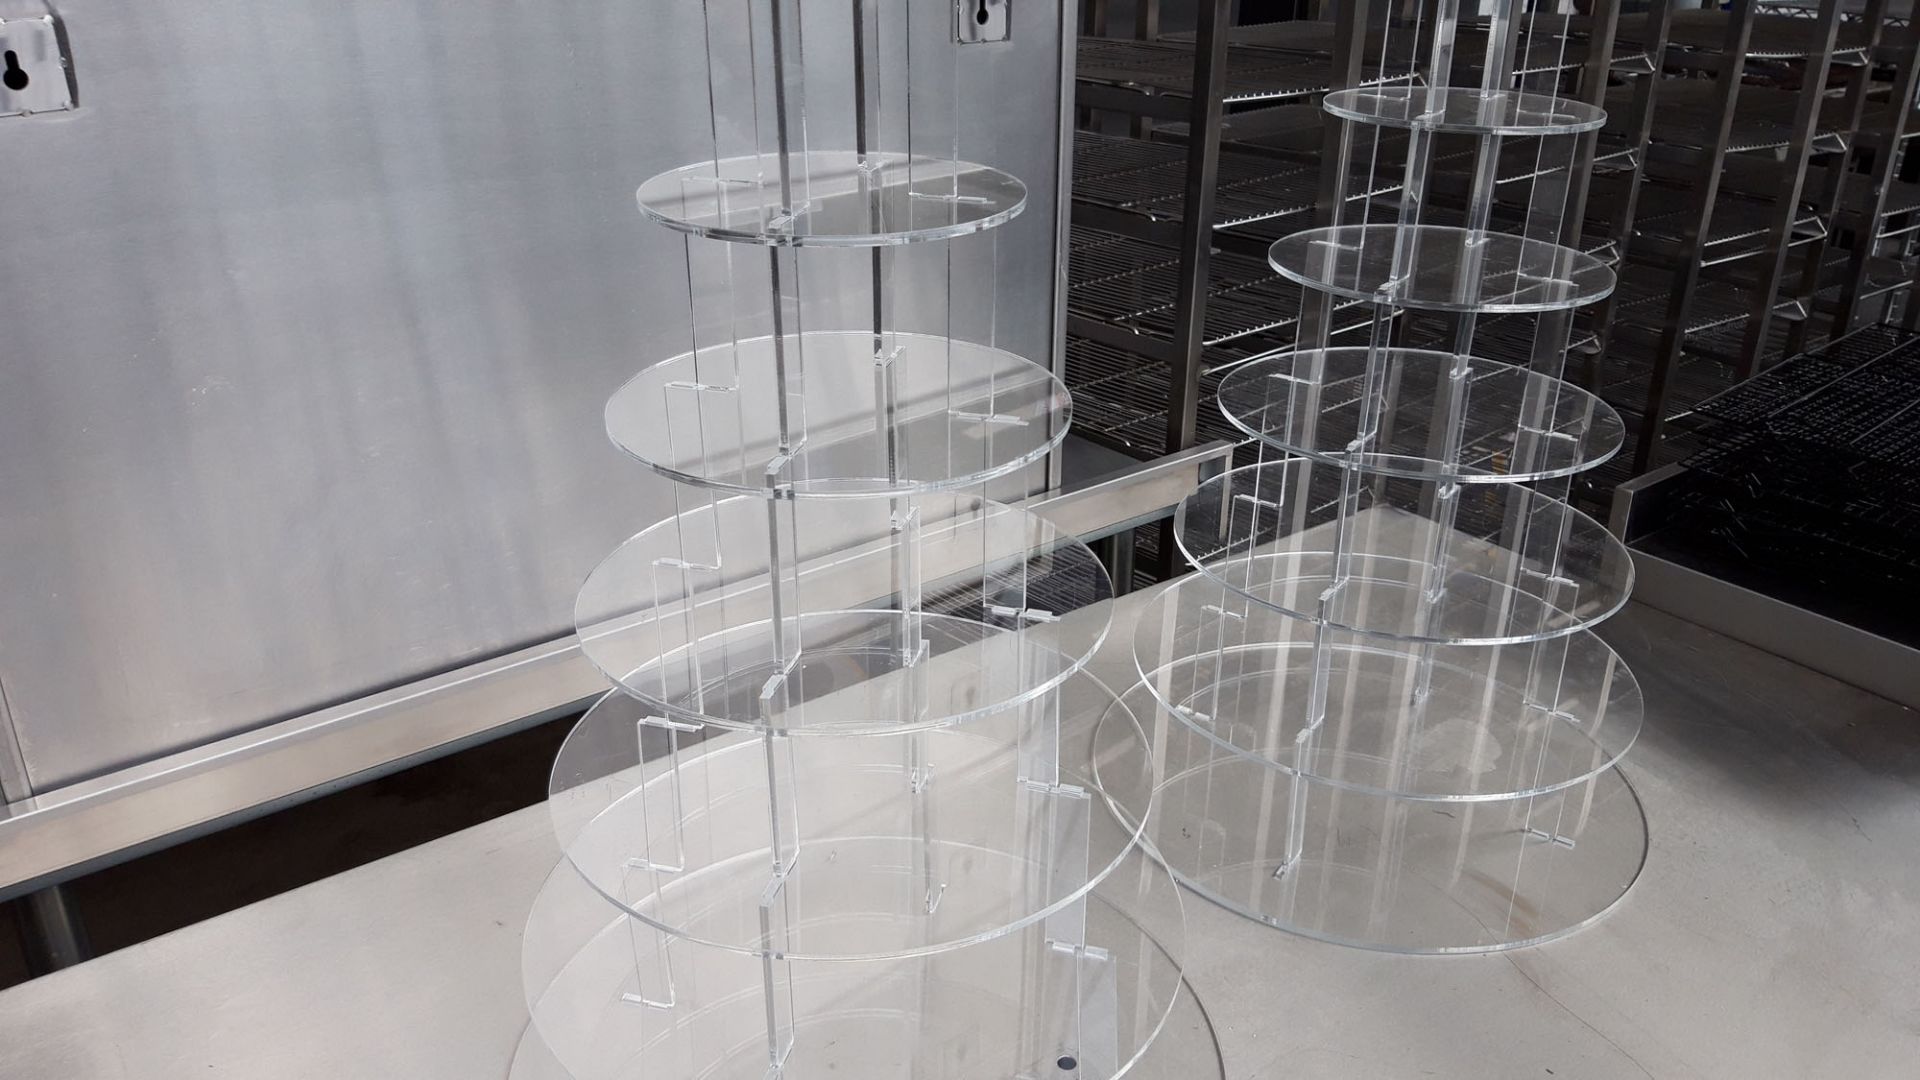 3 65cm 7 tier plastic cake stands - Image 2 of 2